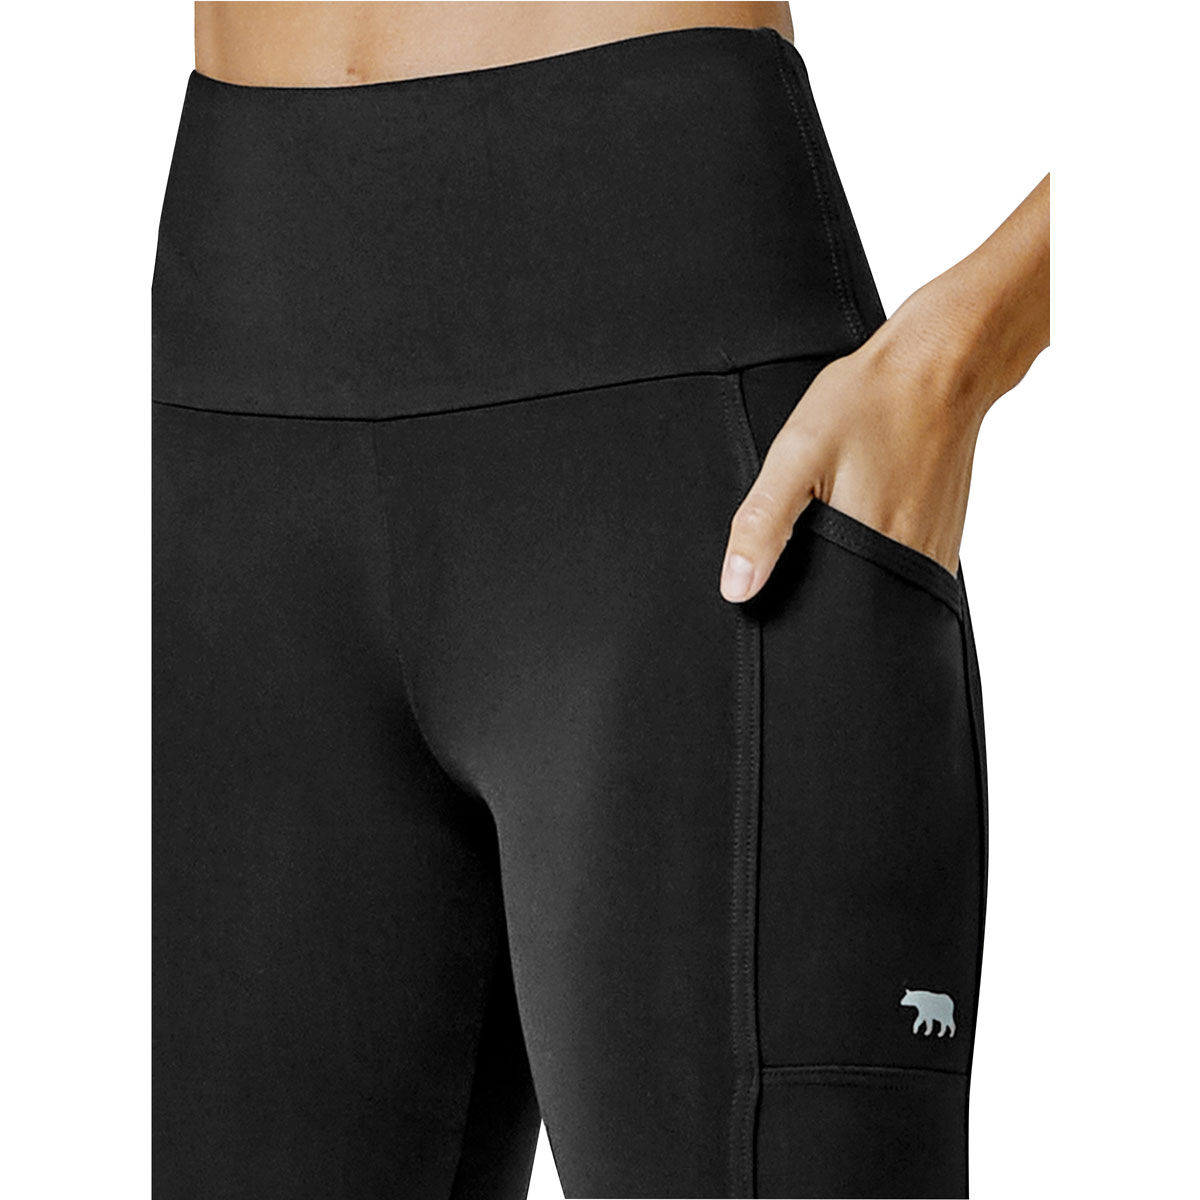 Running Bare Womens Ab Waisted Power Moves 3/4 Tights